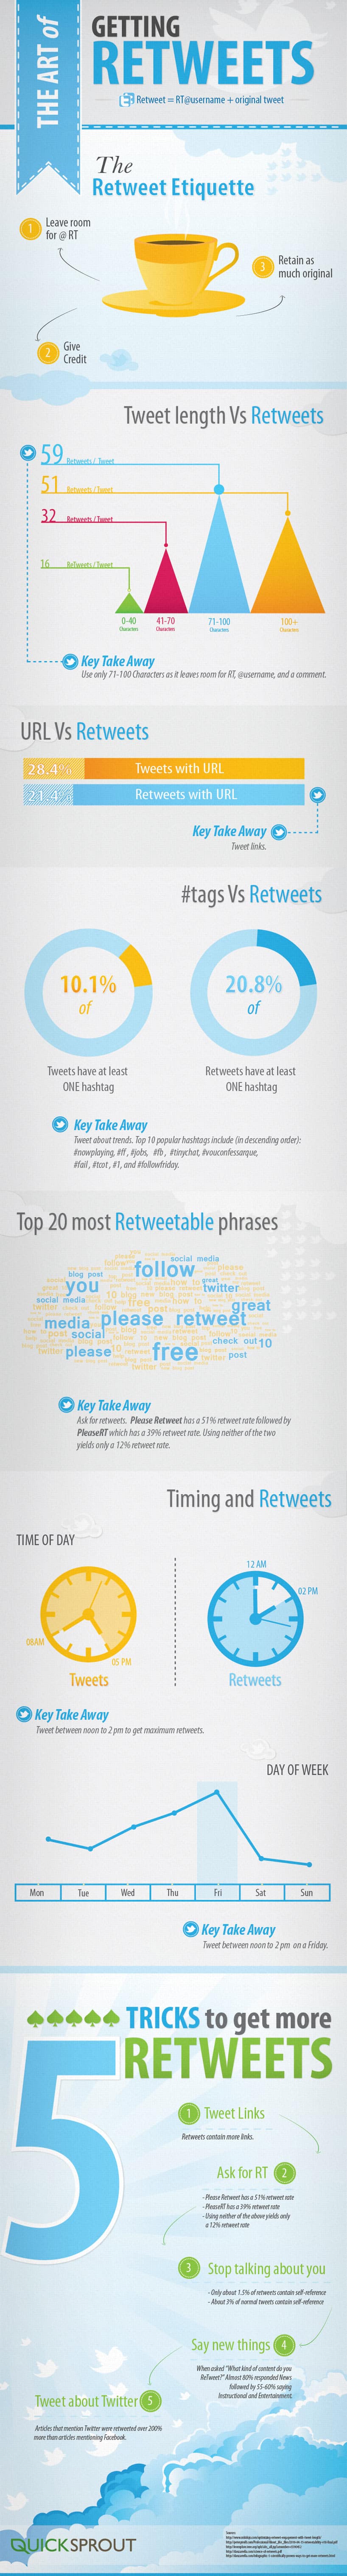 Twitter Etiquette Guide To Increase Your Retweets [Infographic]